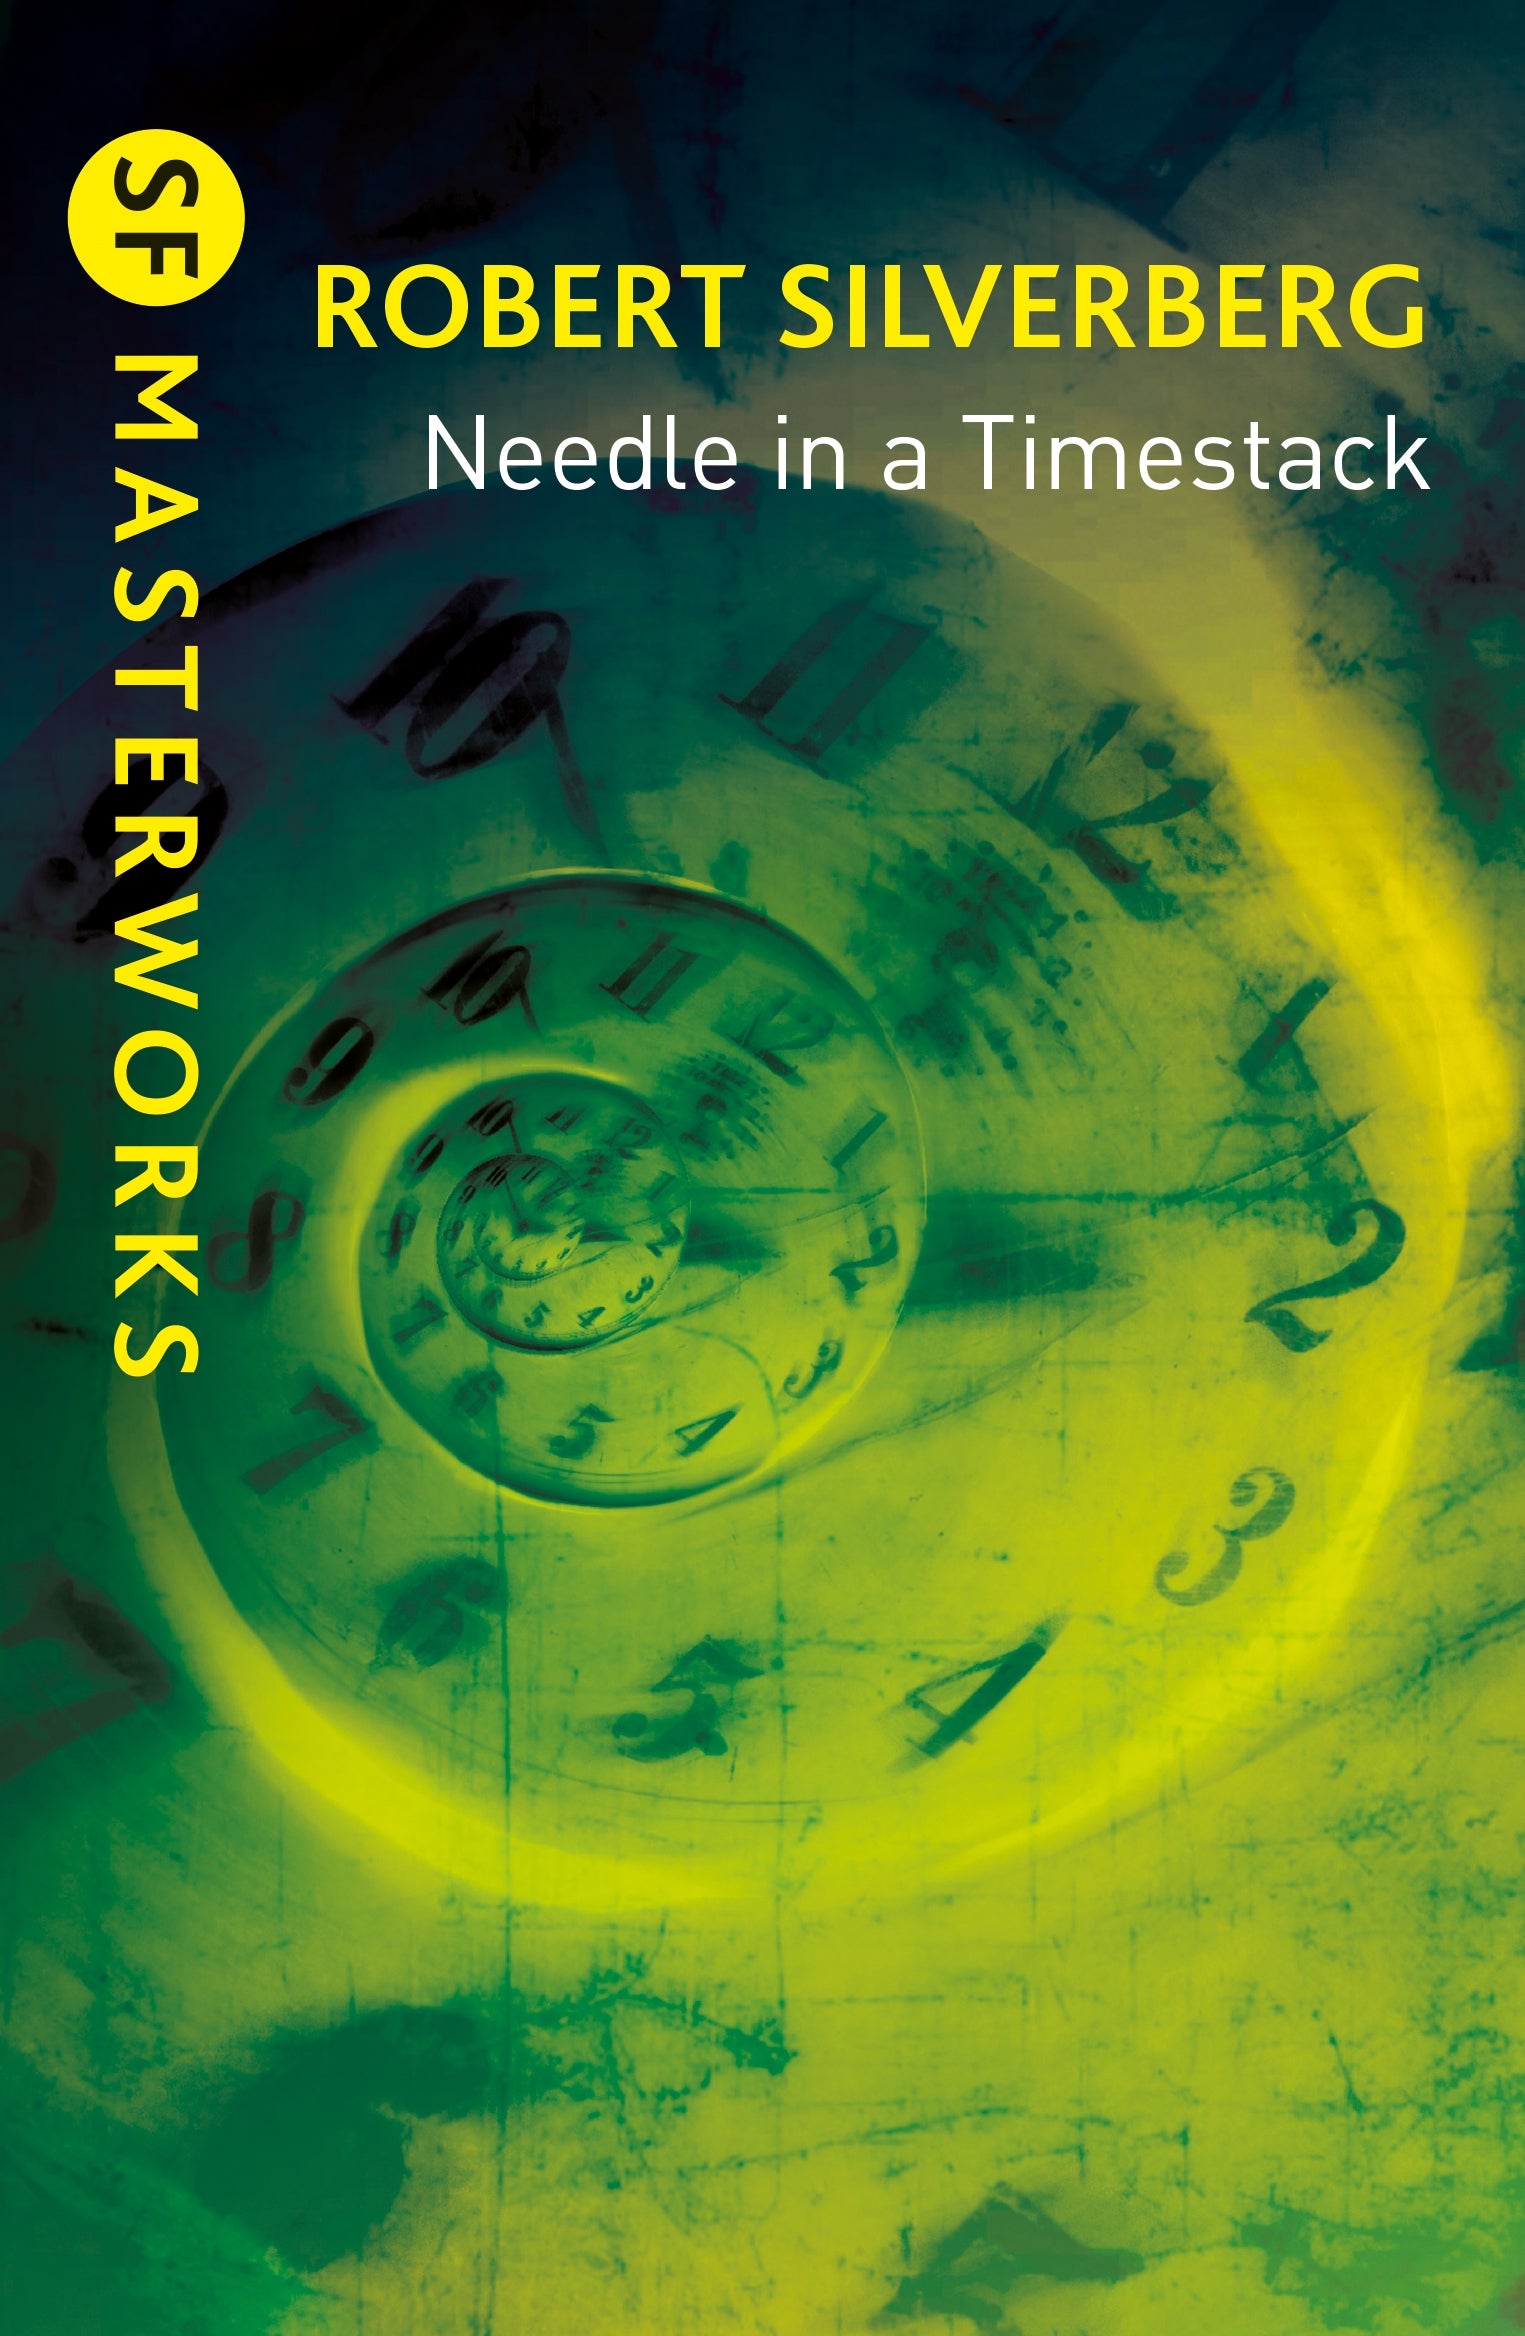 Needle in a Timestack by Robert Silverberg